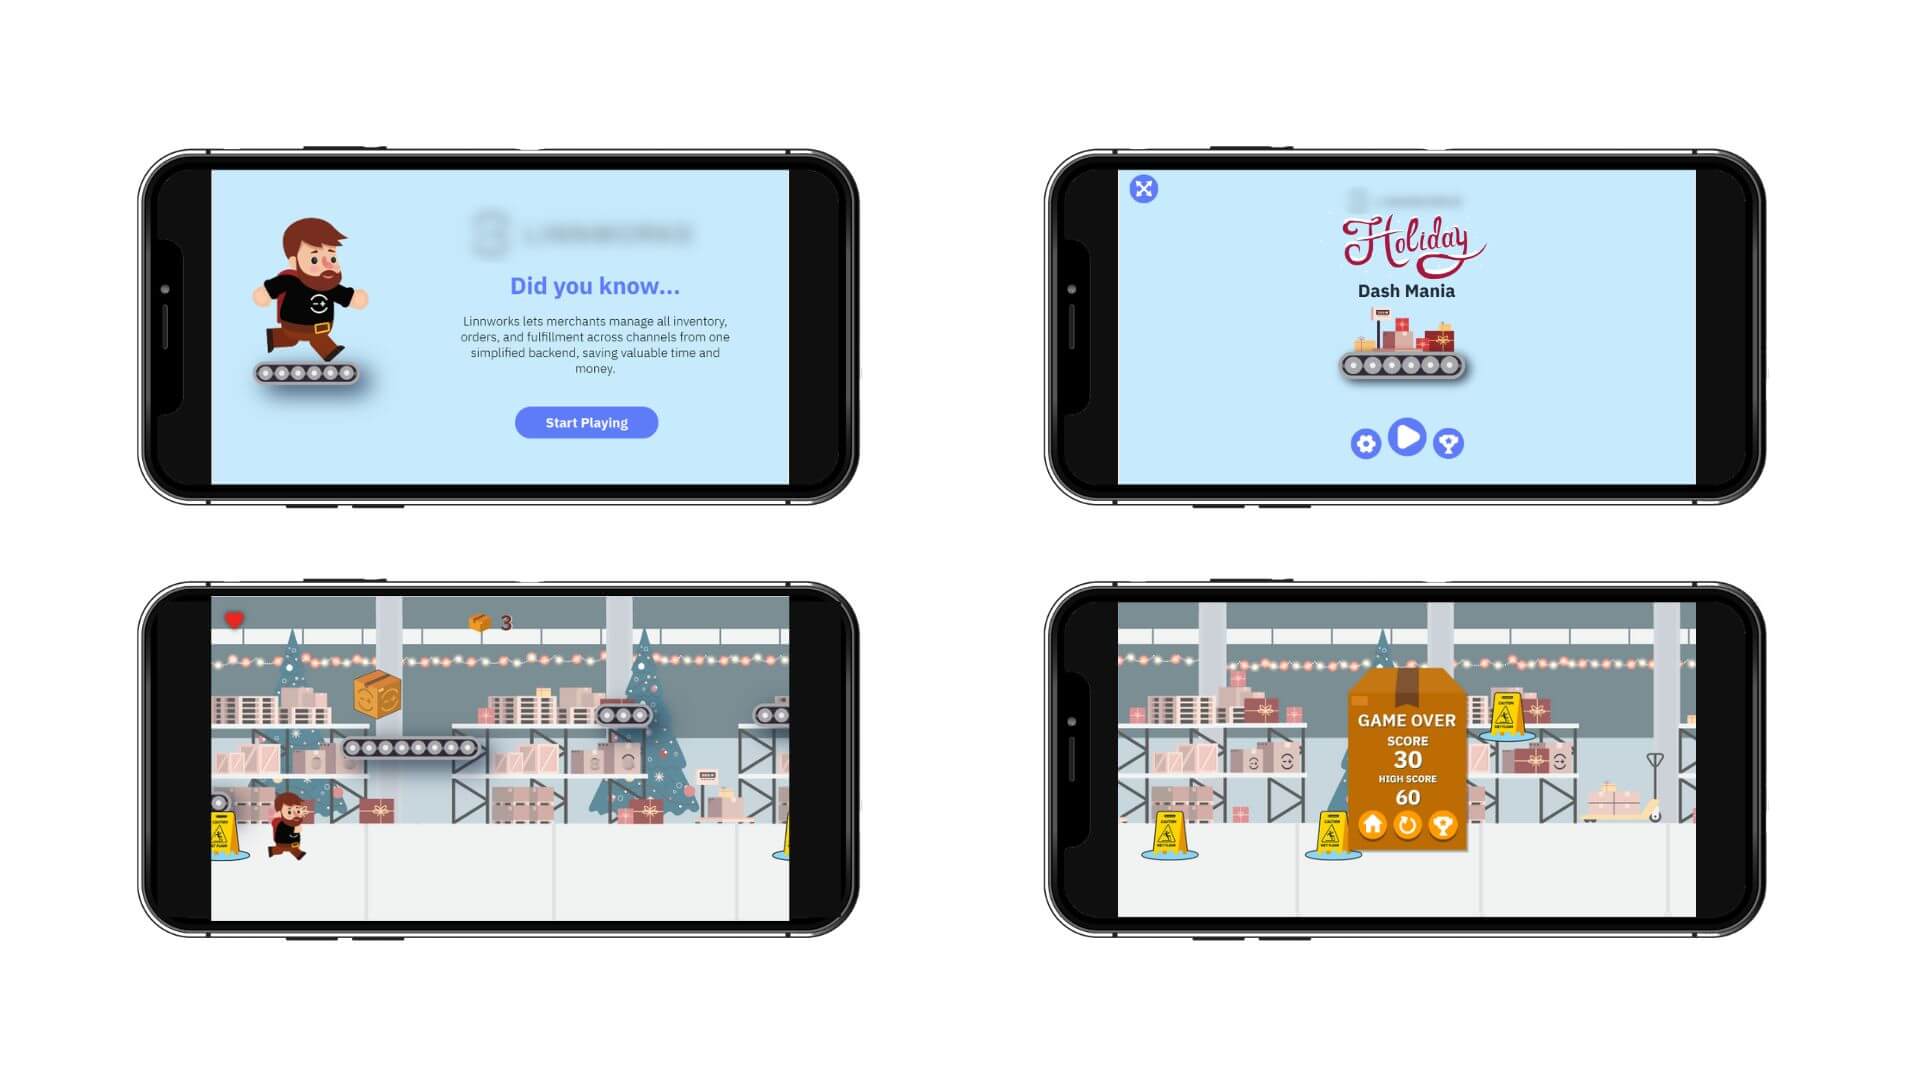 Winter Holiday HTML5 Game For E-Commerce Brands and Online Shops